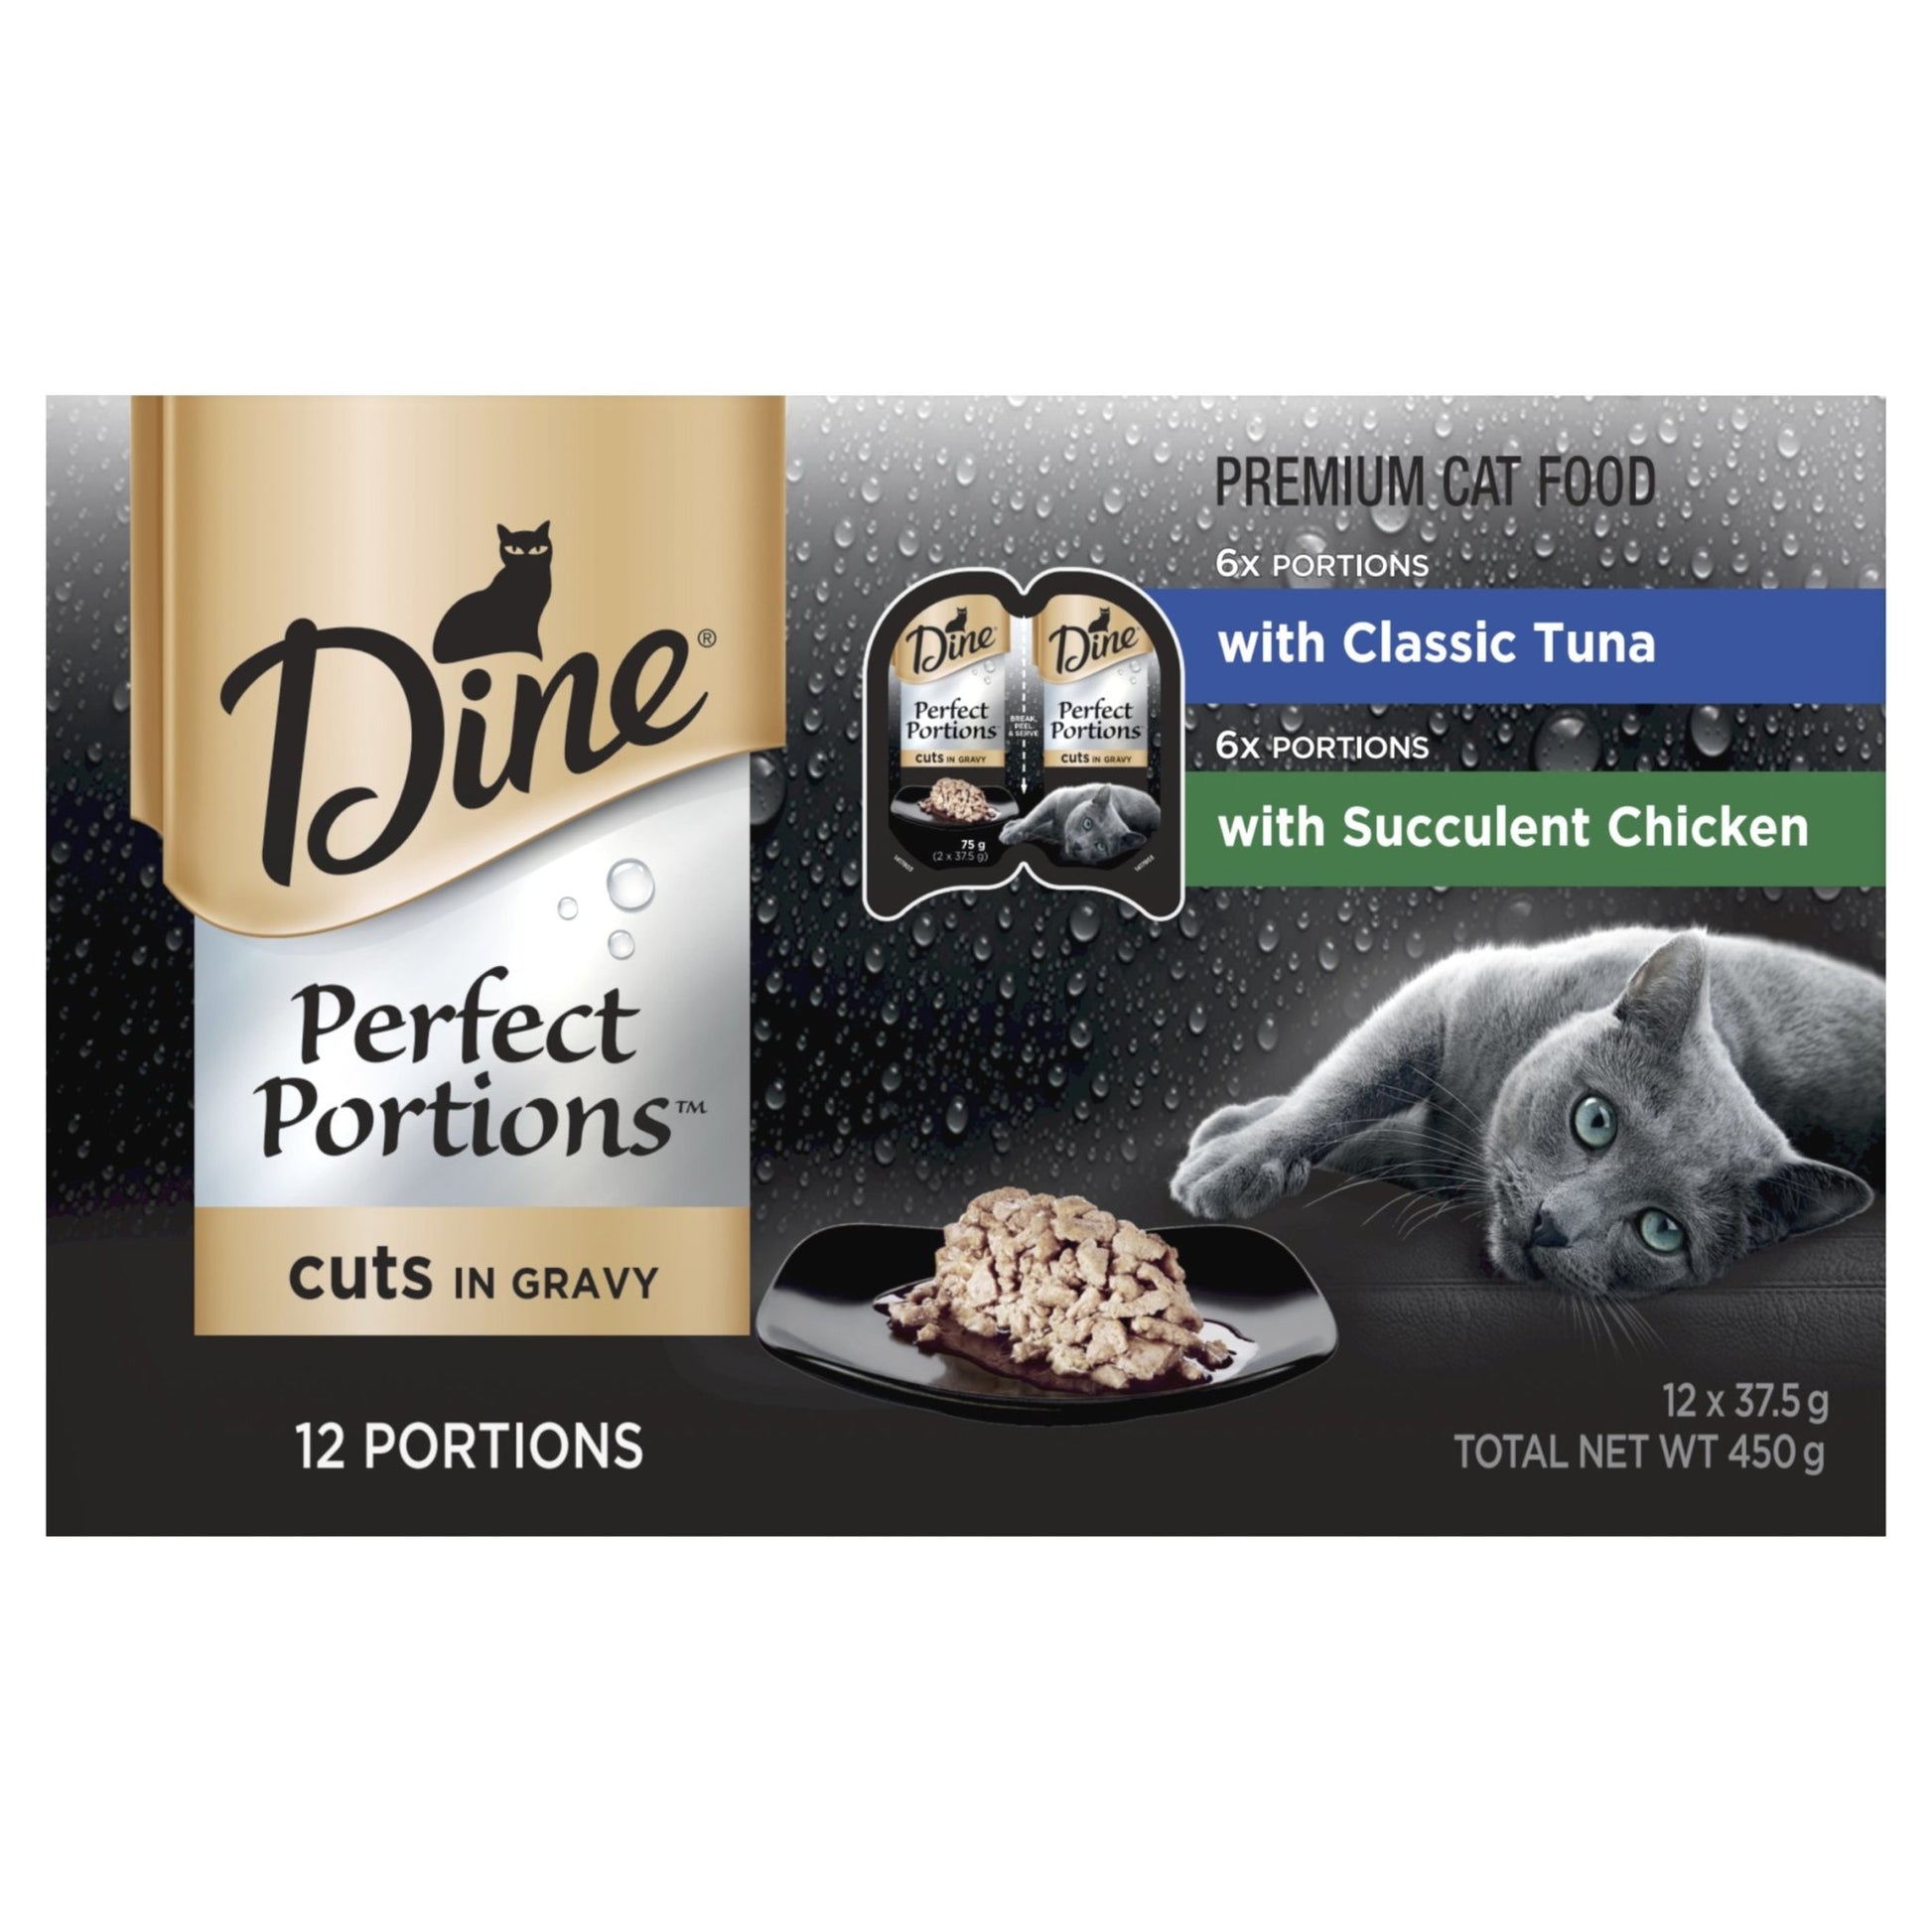 Dine Perfect Portions 6x75g Cuts in Gravy - Woonona Petfood & Produce